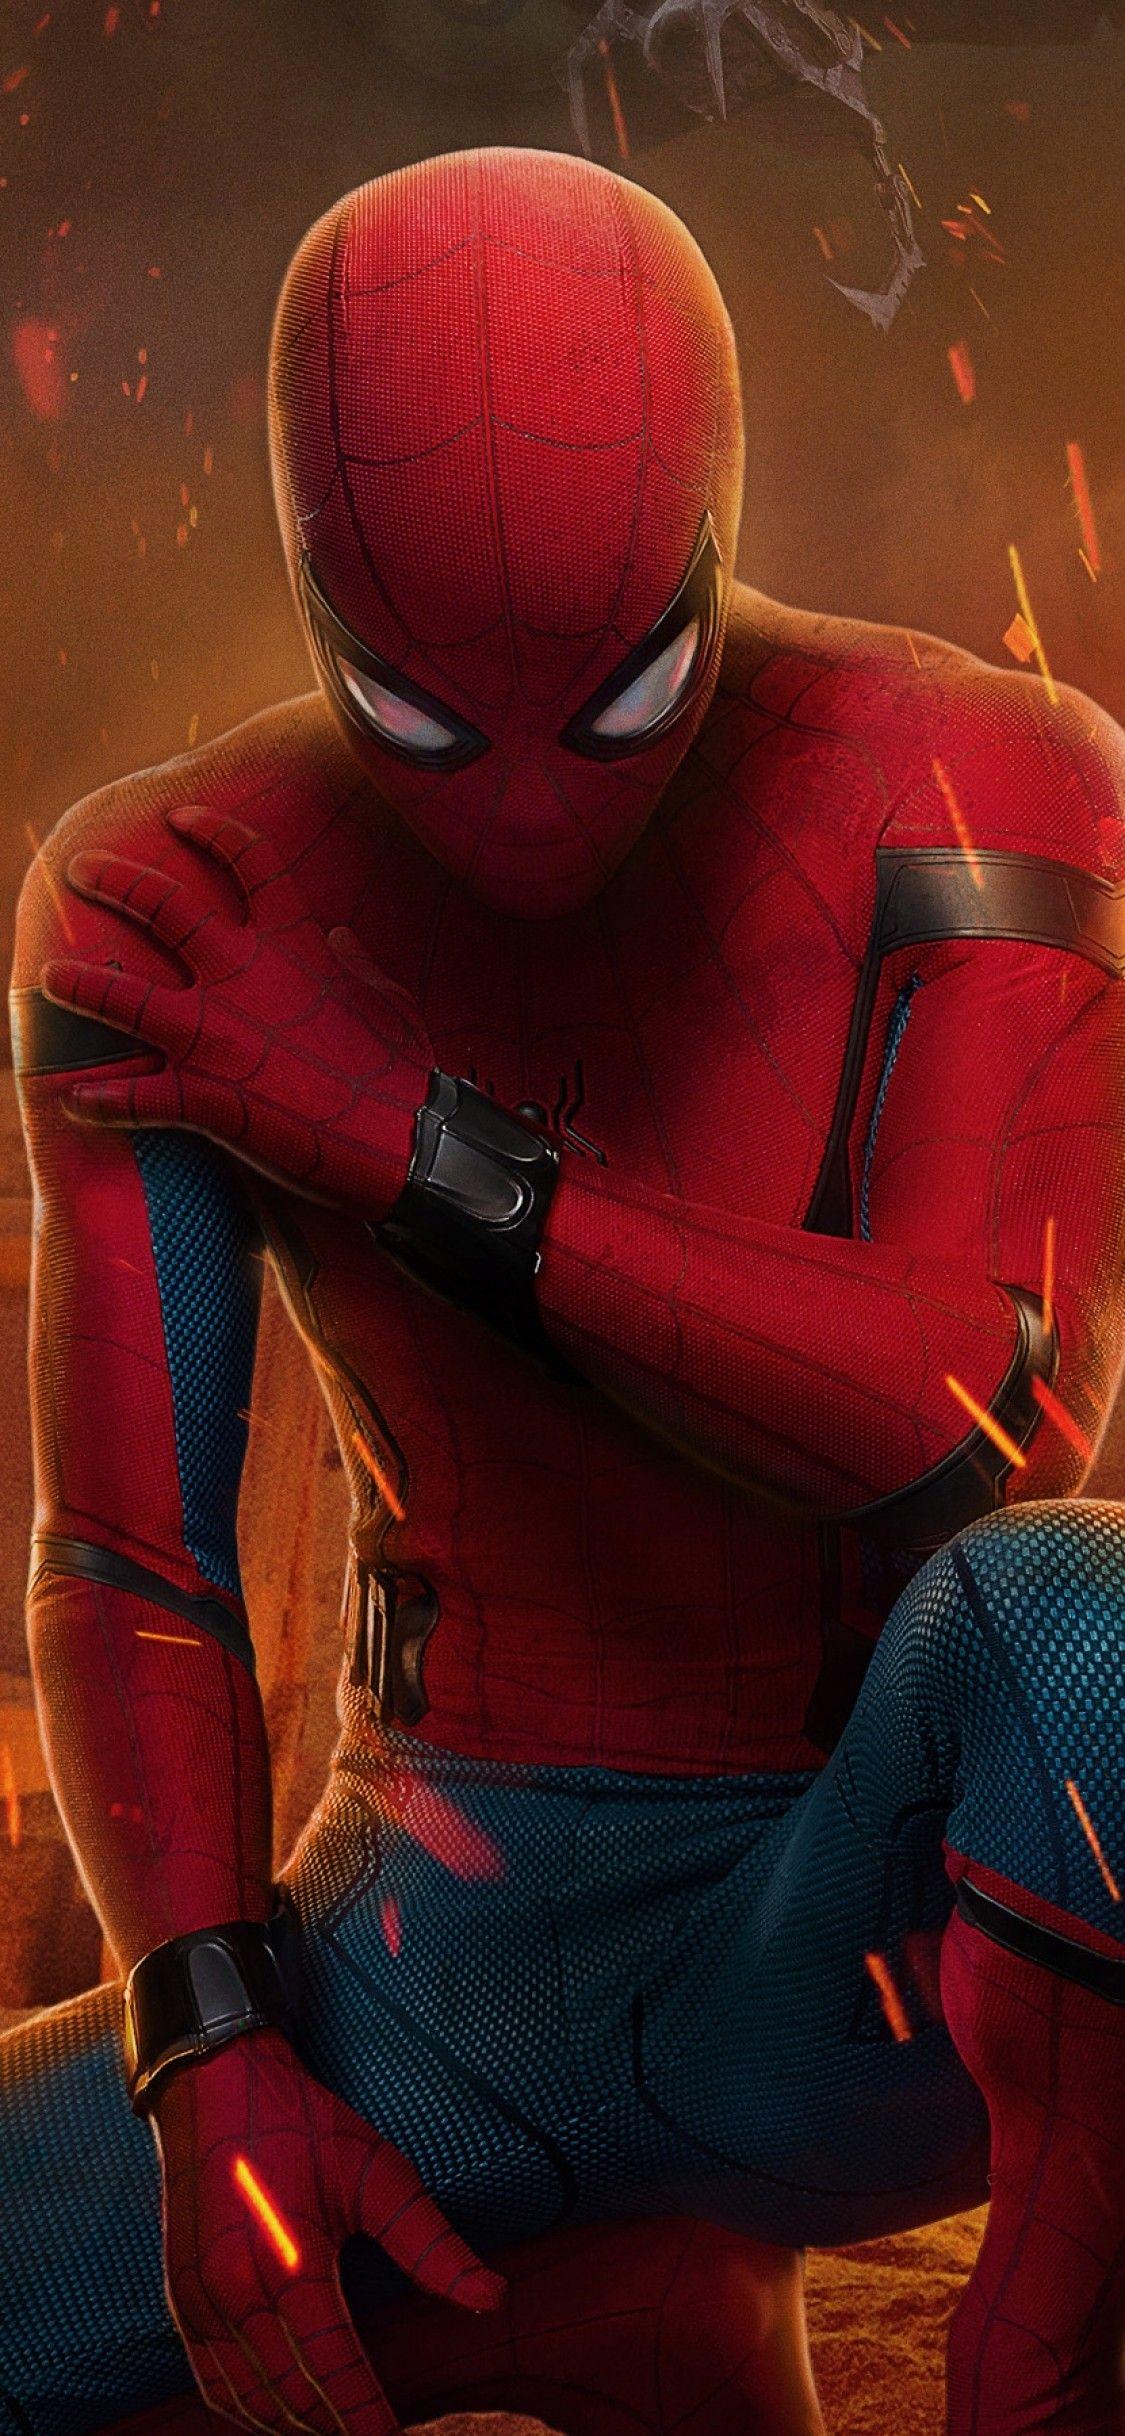 Featured image of post Lock Screen 1080P Spiderman Wallpaper Hd If you re looking for more backgrounds then here s a list of what screen resolutions we support along with popular devices that support them